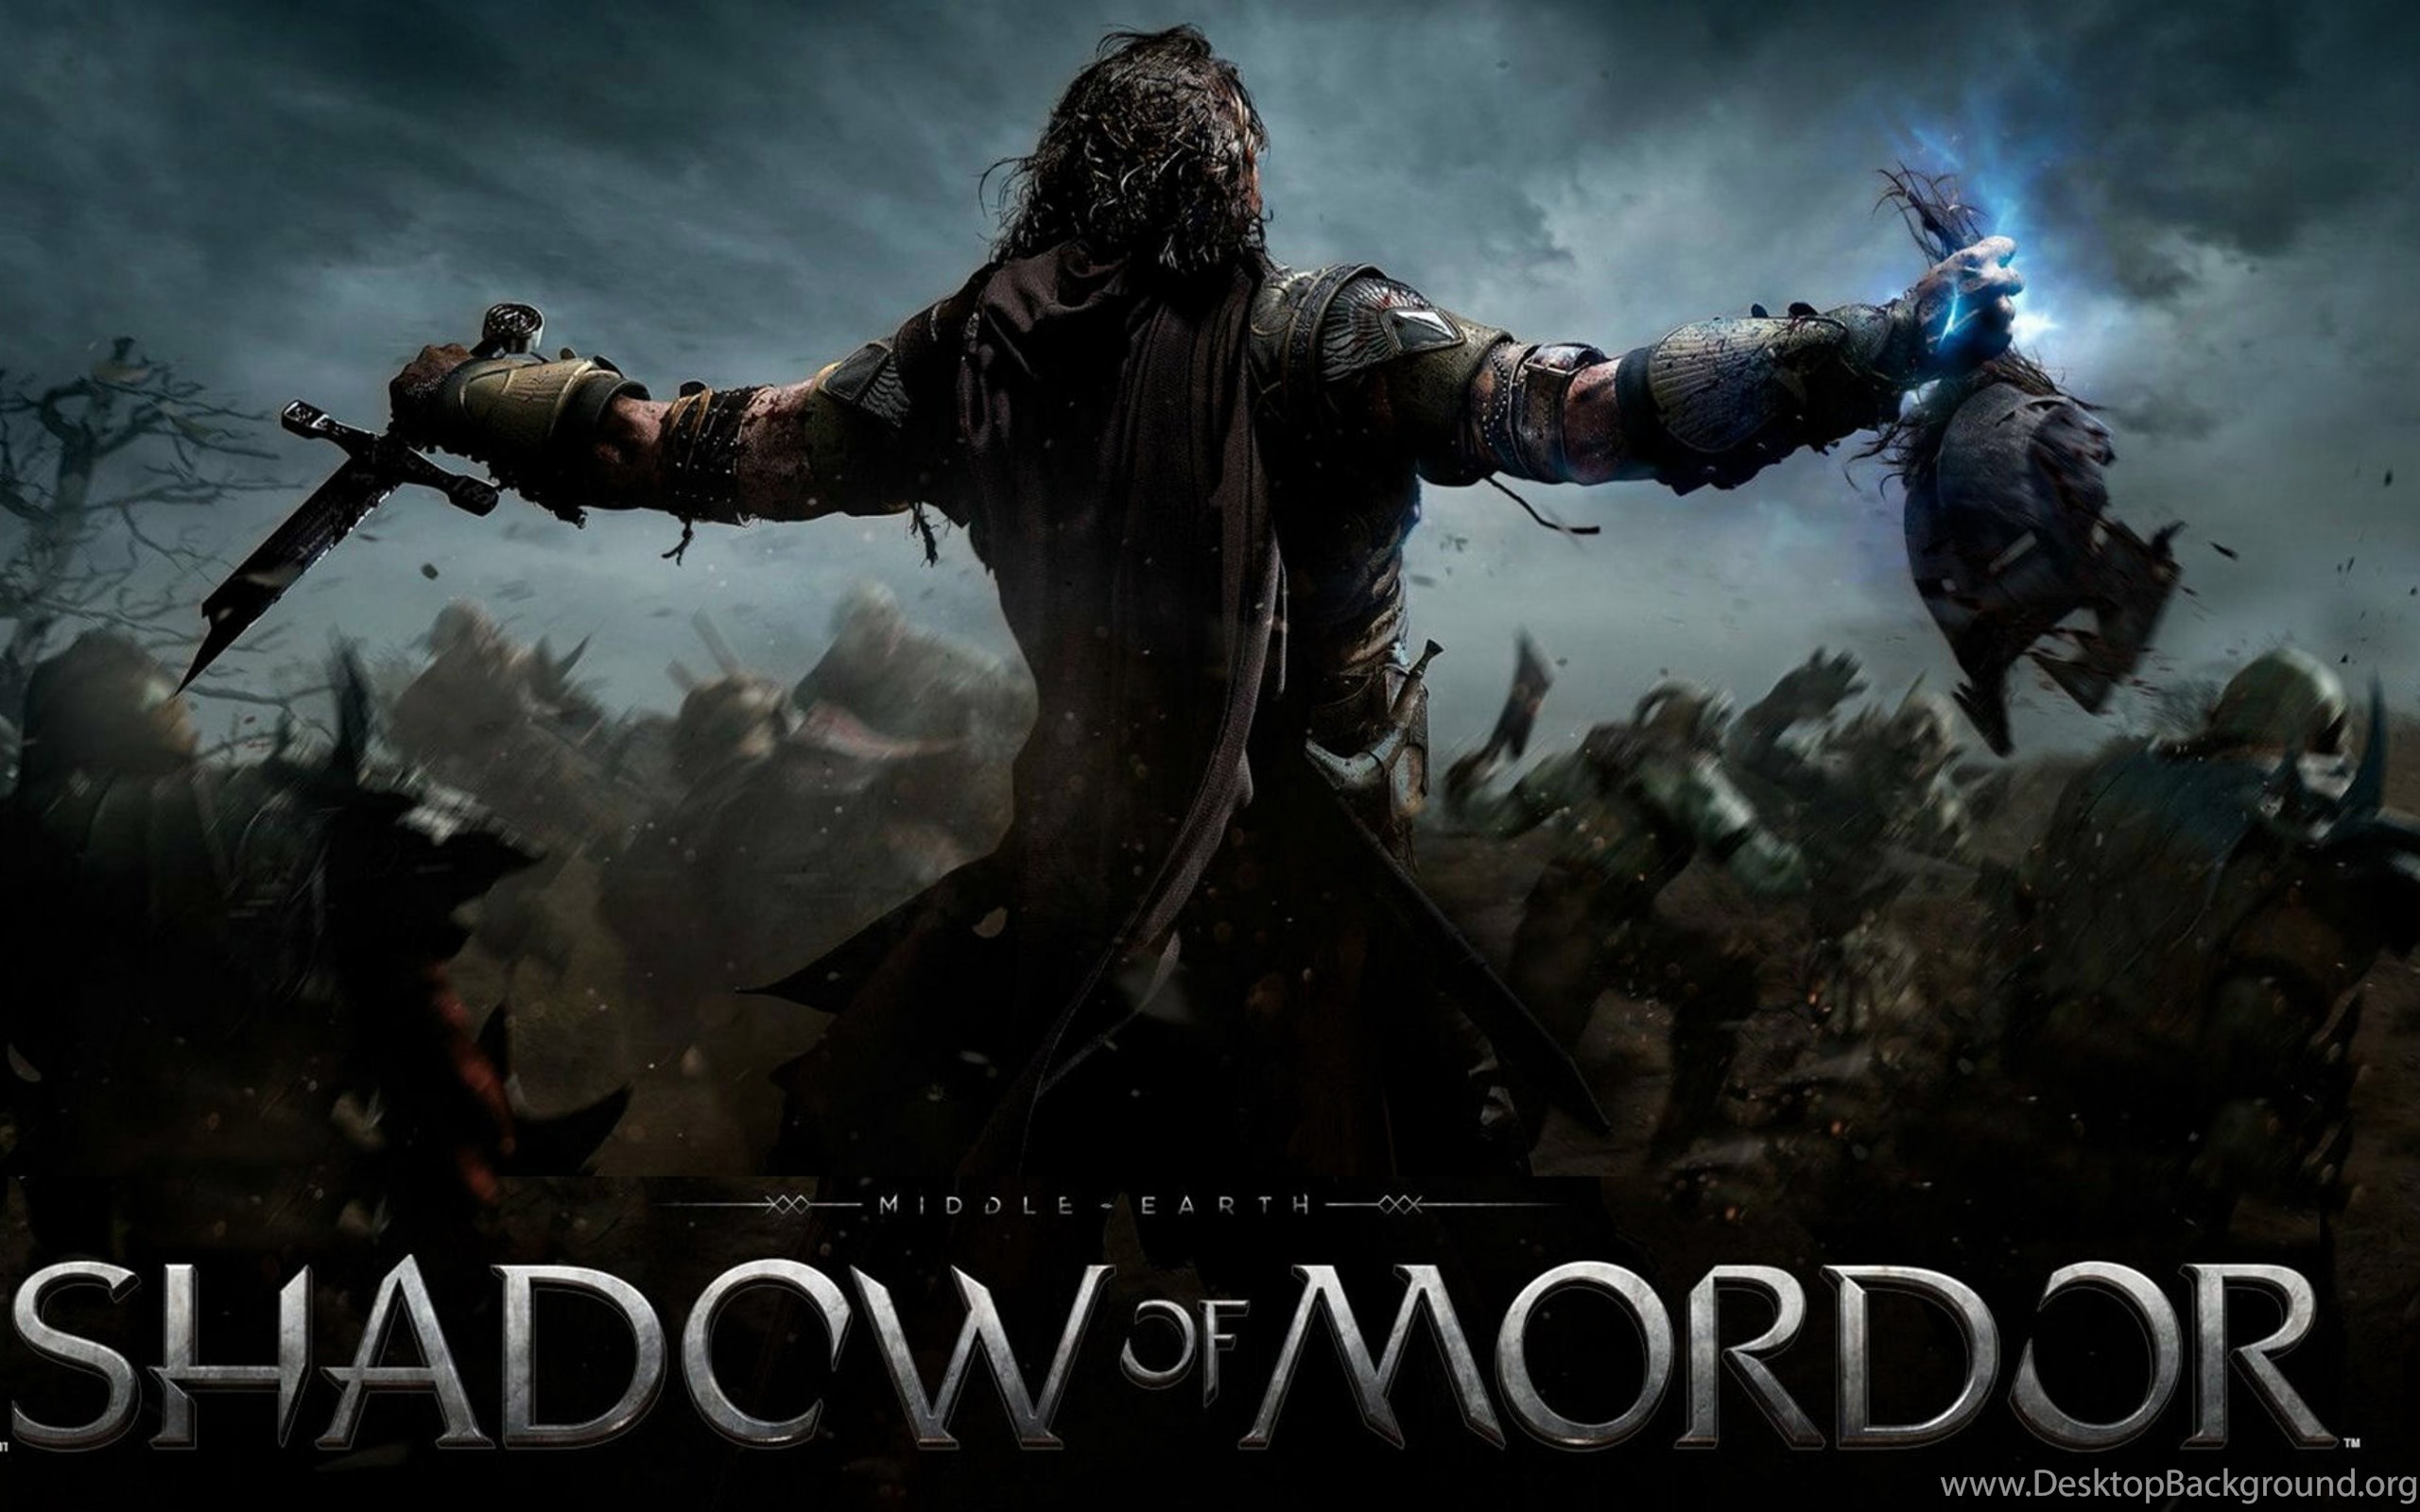 Download Wallpapers 3840x2400 Middle earth Shadow Of Mordor Desktop